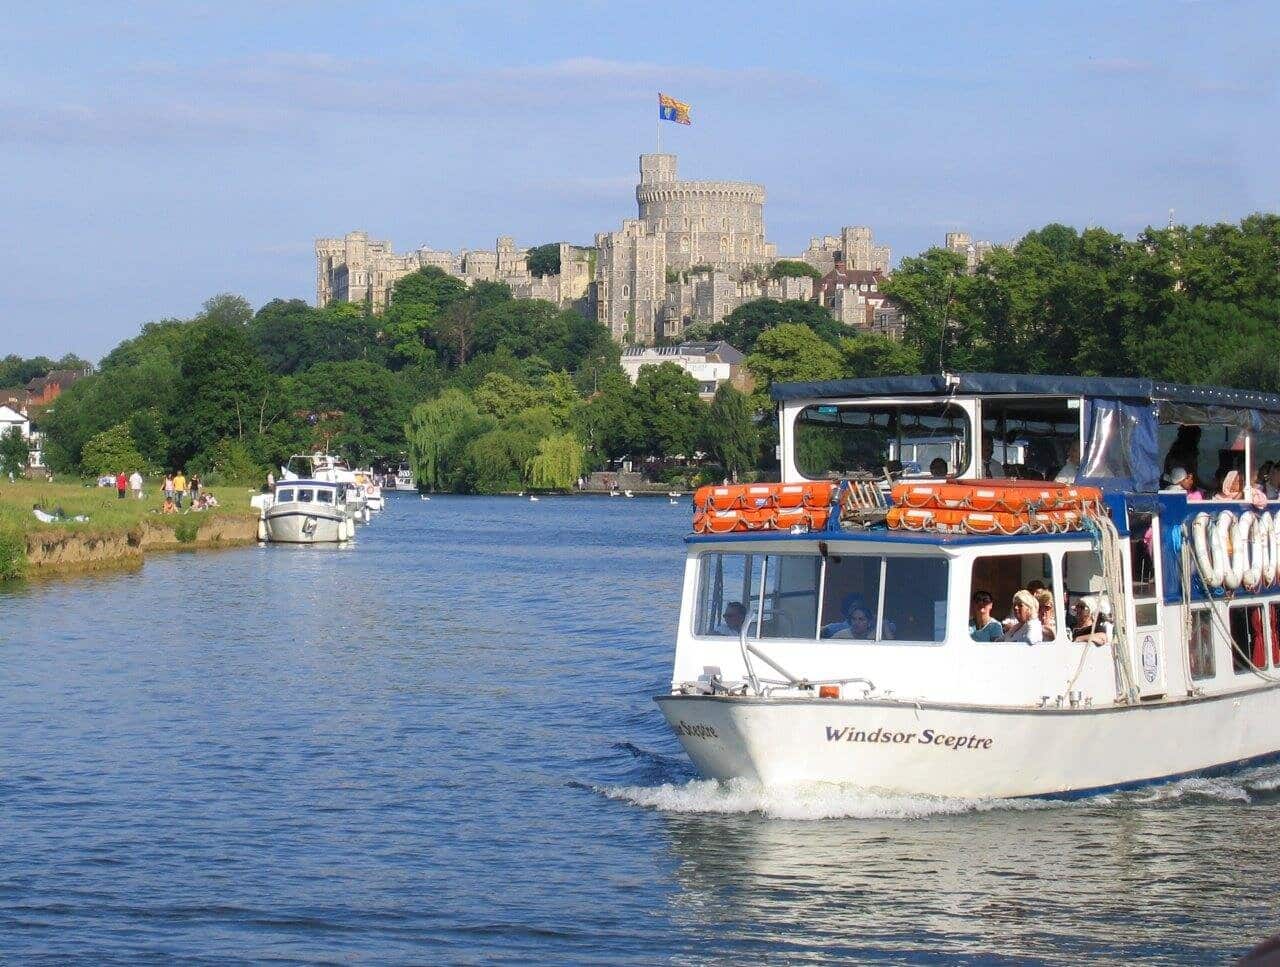 Image of a private river boat cruise with Windsor castle in the background